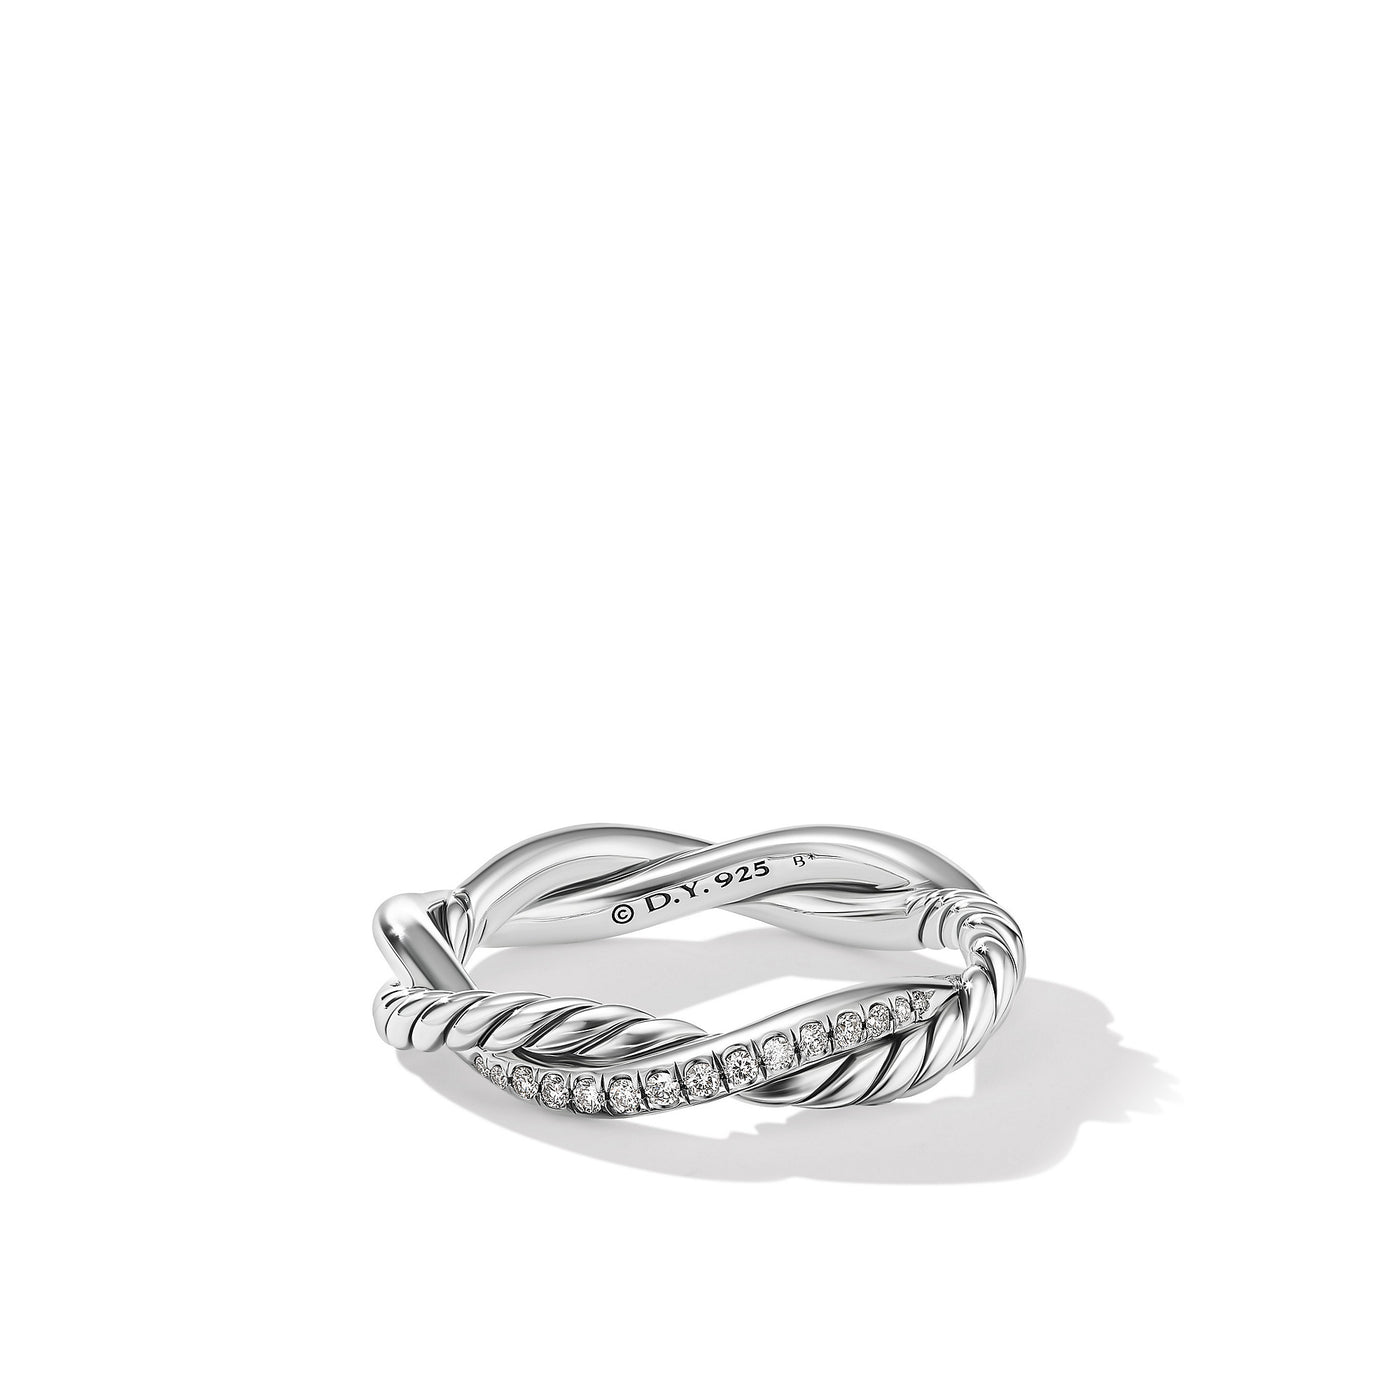 Petite Infinity Band Ring in Sterling Silver with Diamonds\, 4mm